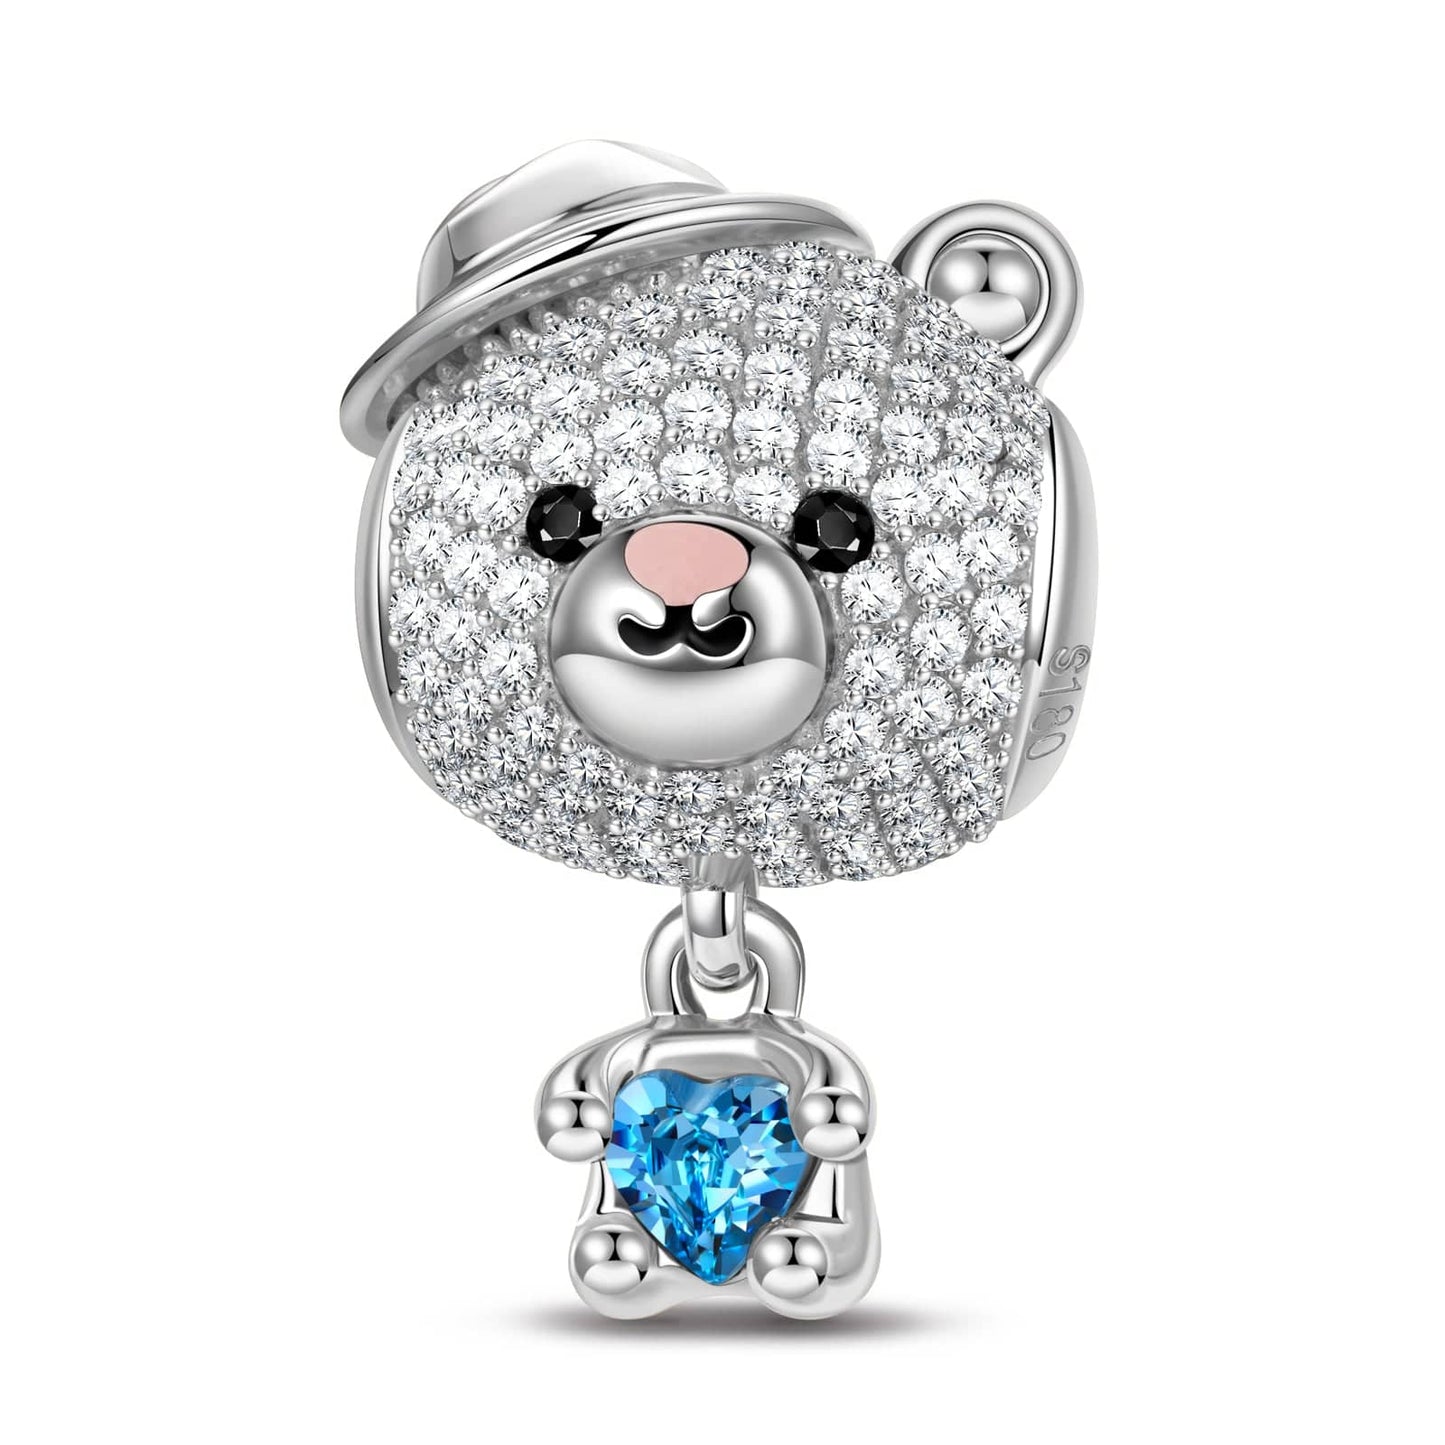 Love Hug Bear Tarnish-resistant Silver Animal Charms With Enamel In White Gold Plated - Heartful Hugs Collection